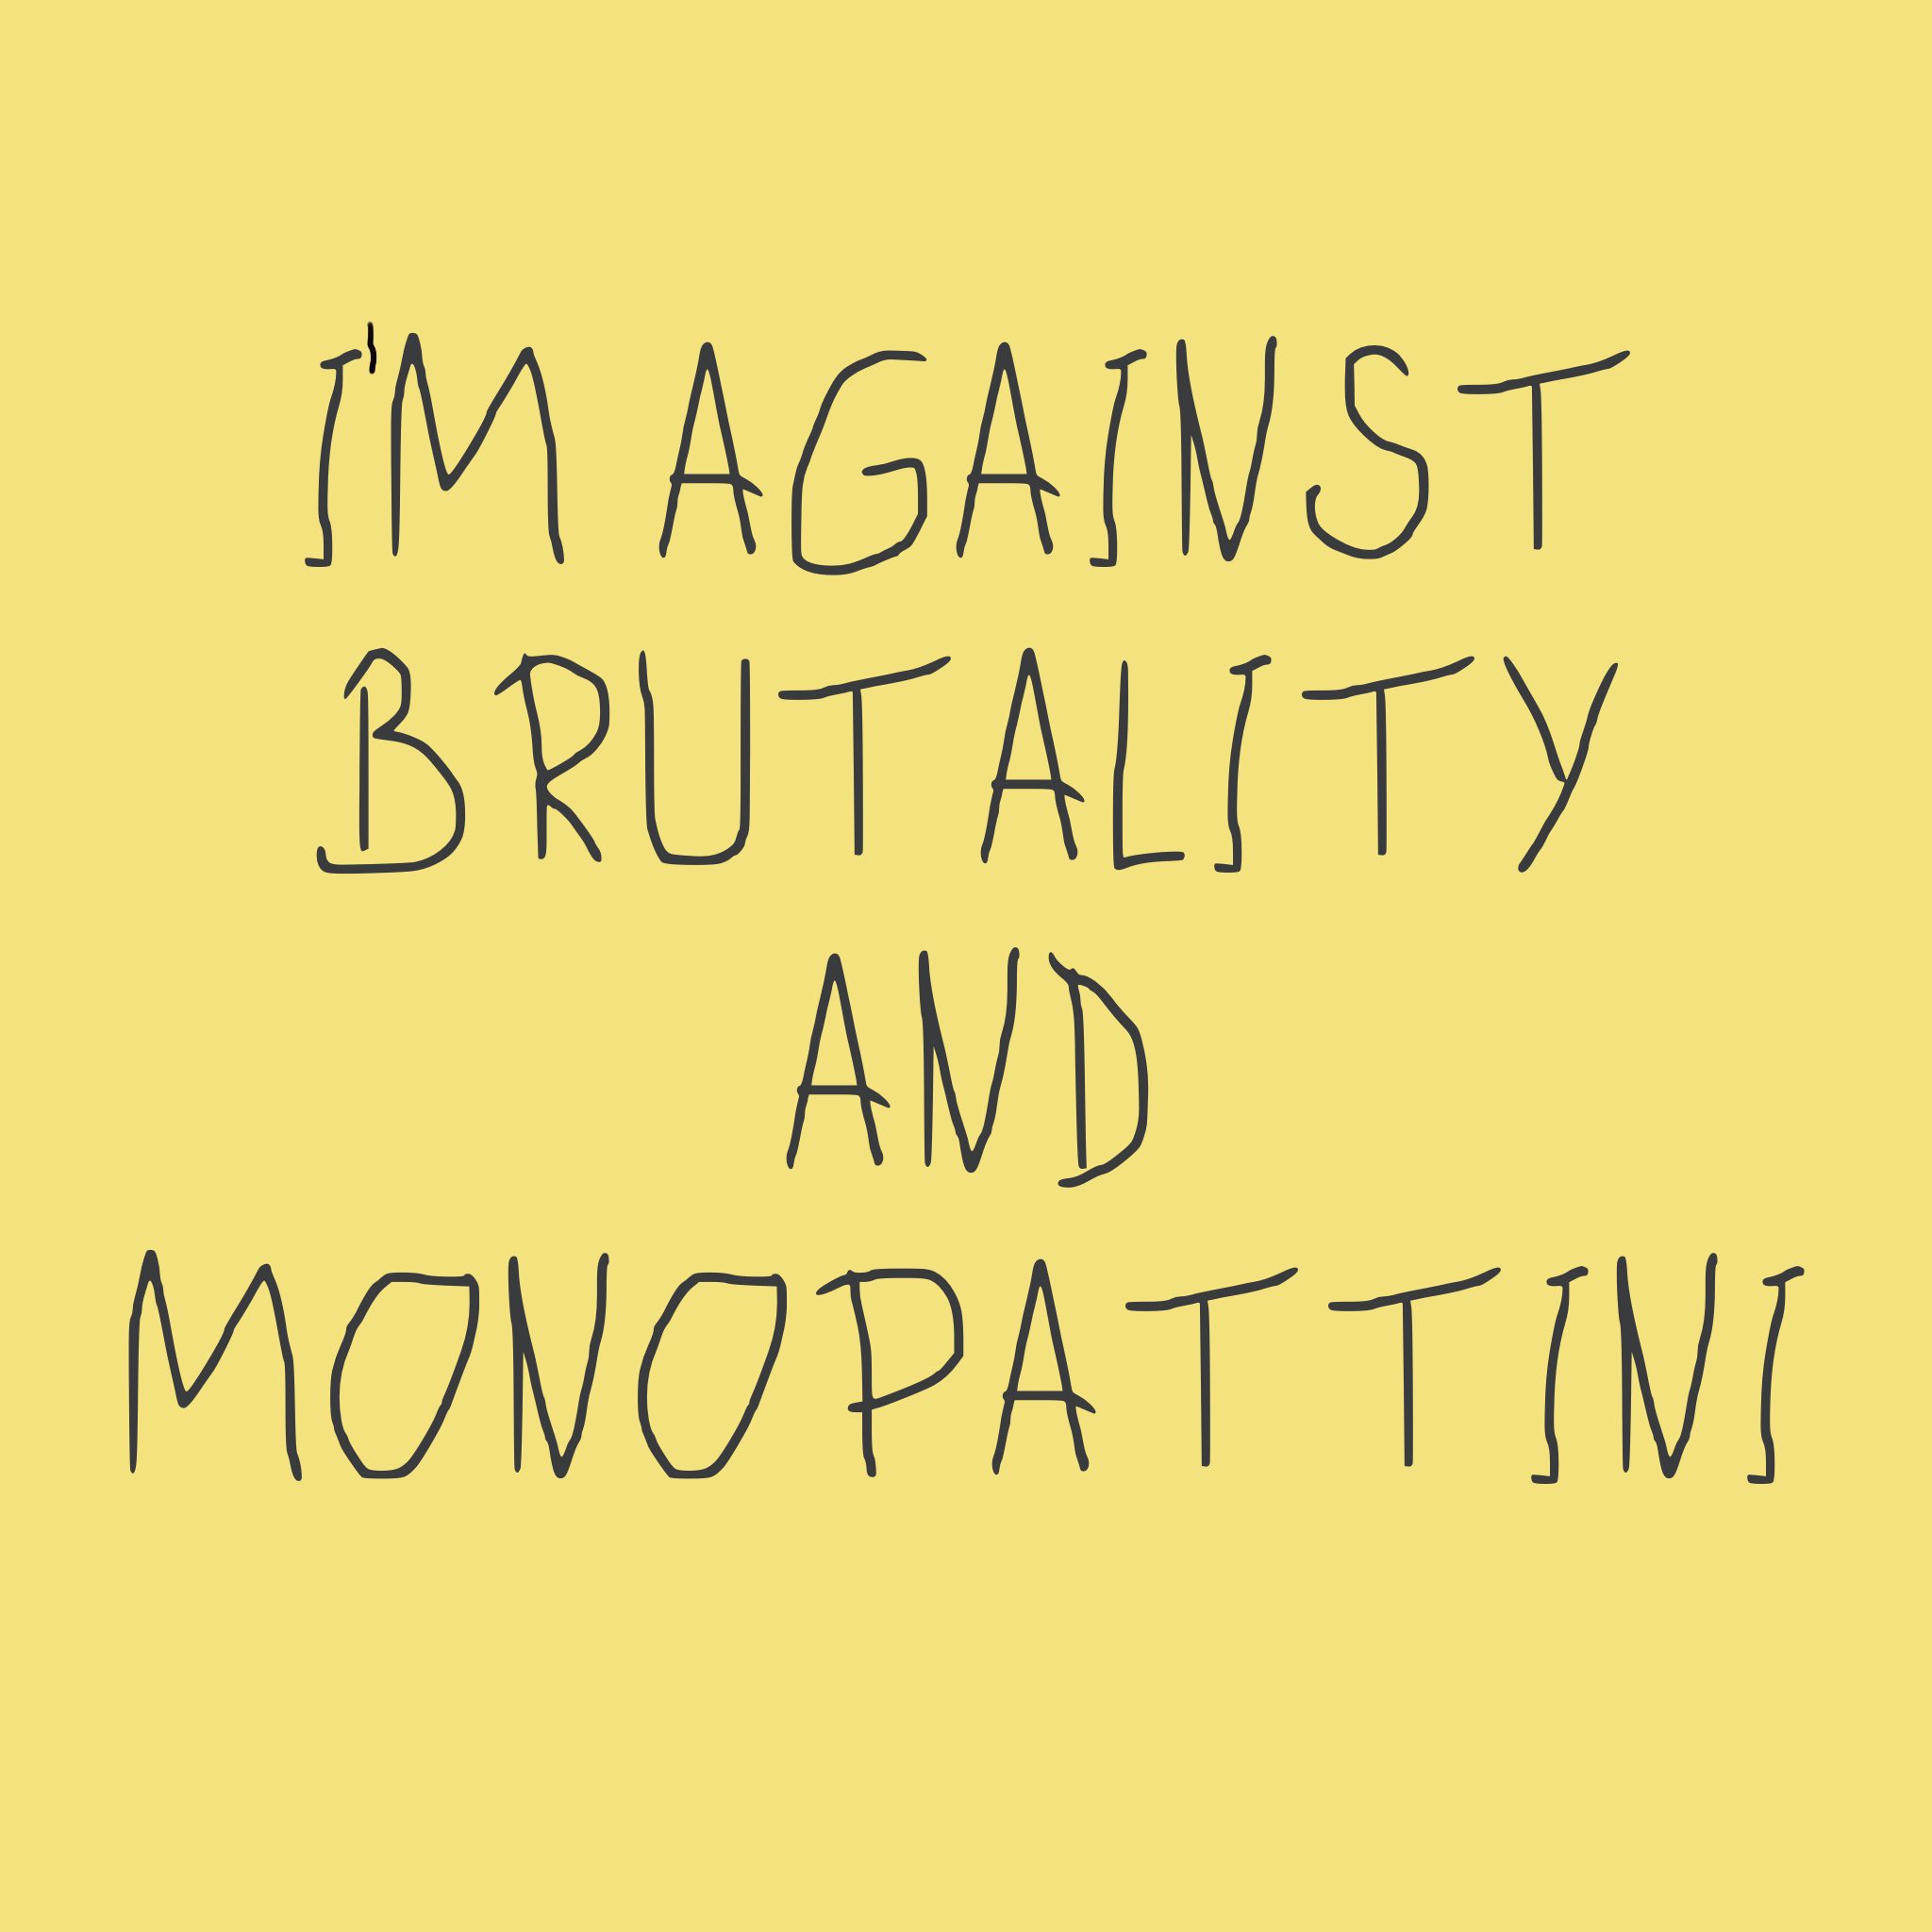 I'm against brutality and monopattini